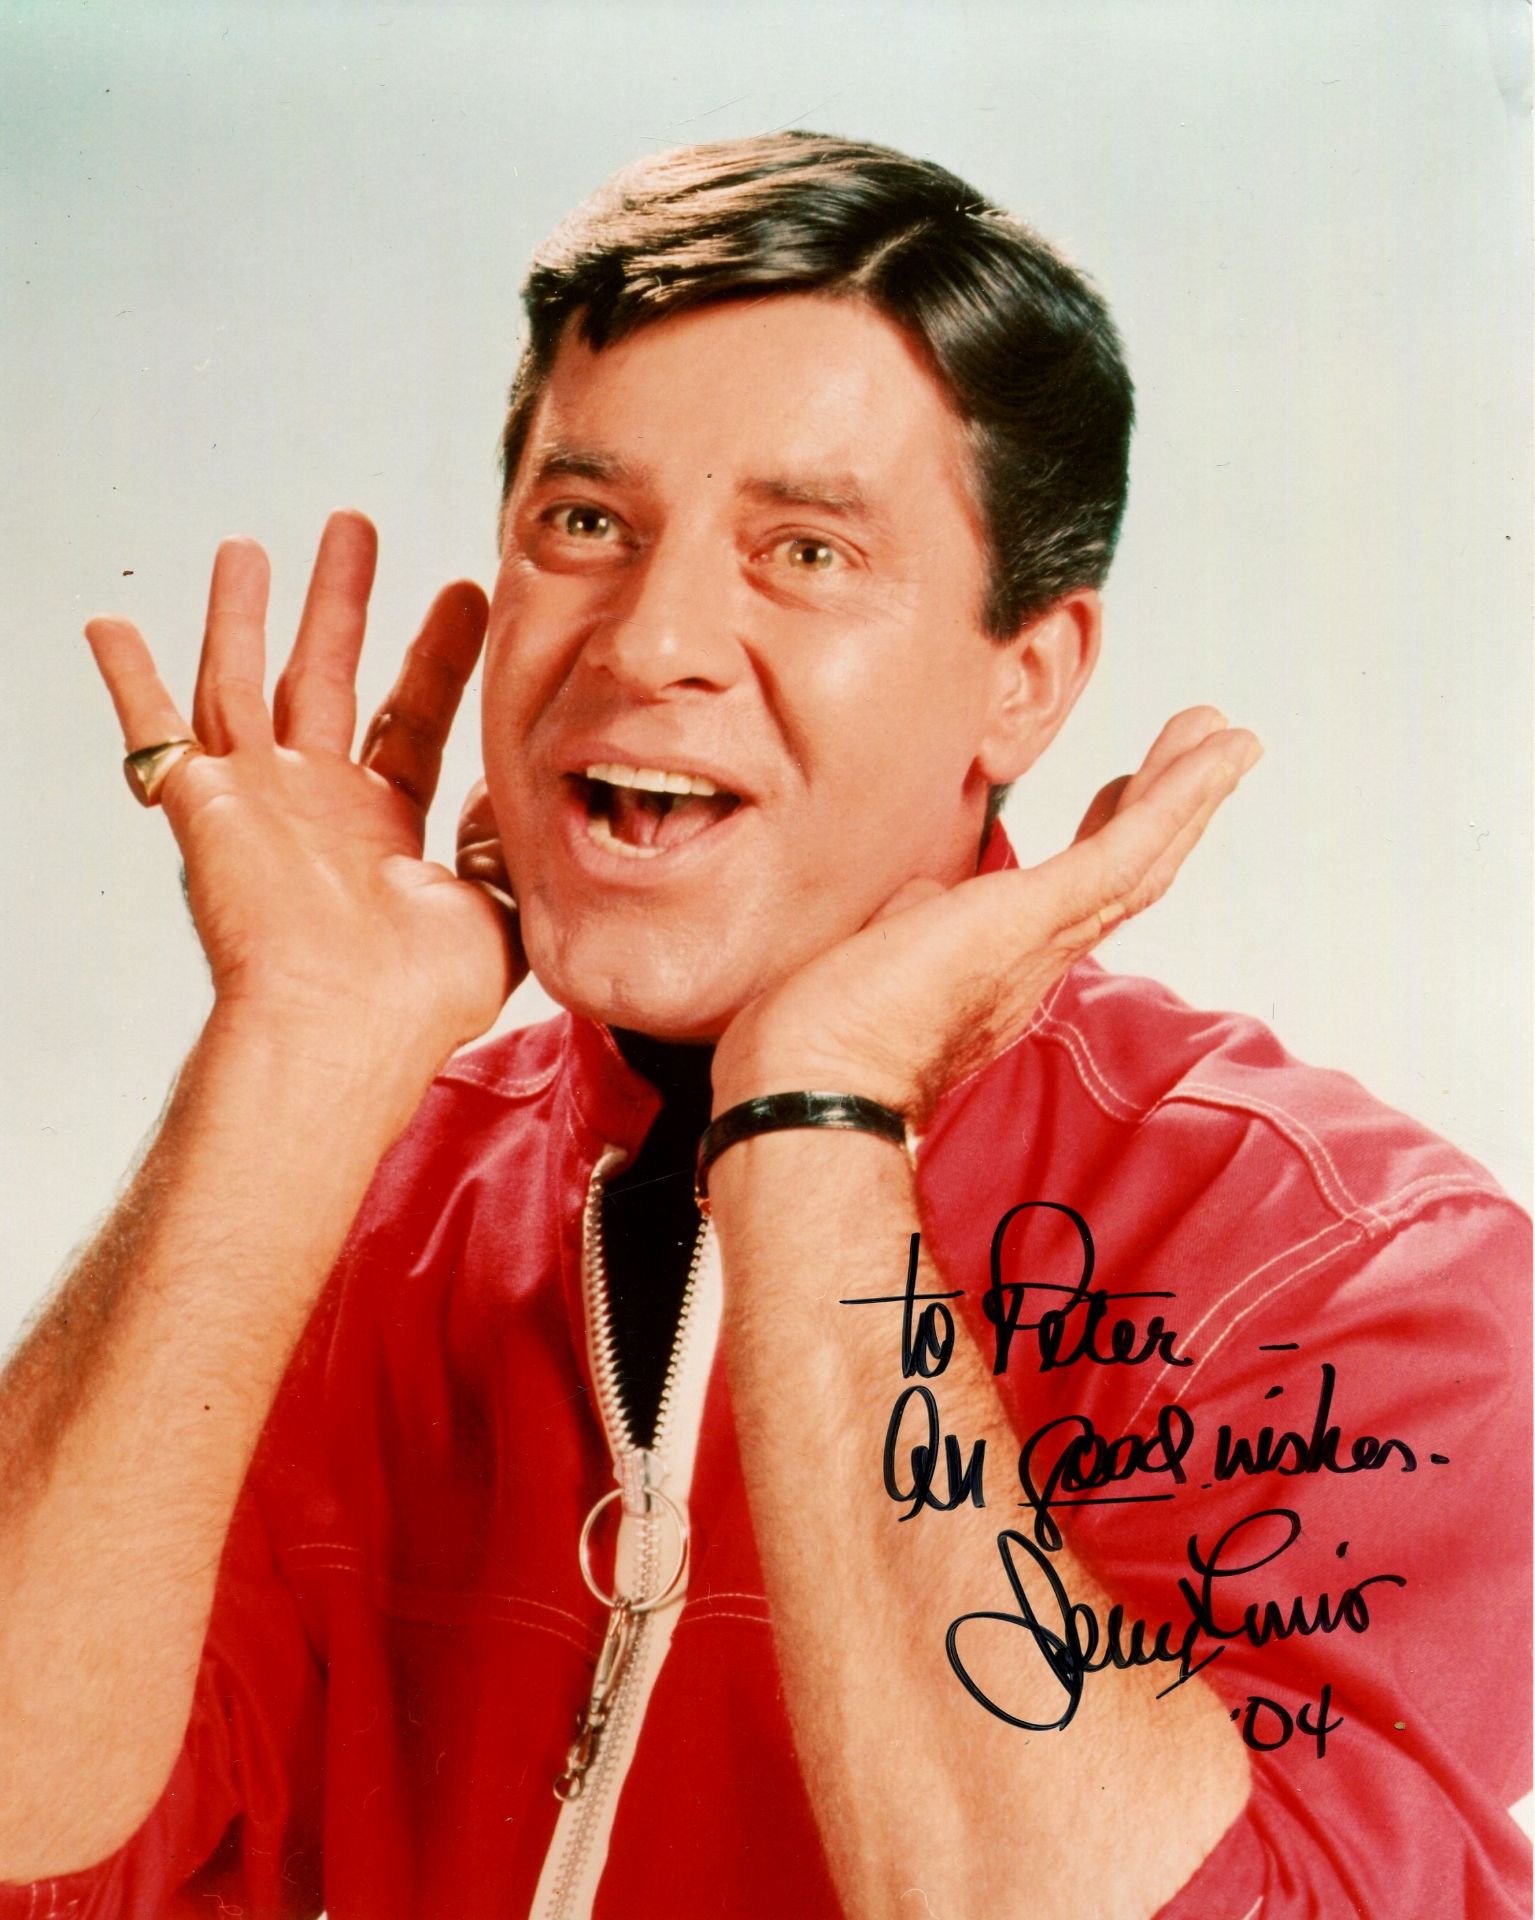 LEWIS JERRY: (1926-2017) American comedian, actor & singer. Signed and inscribed 8 x 10 photograph